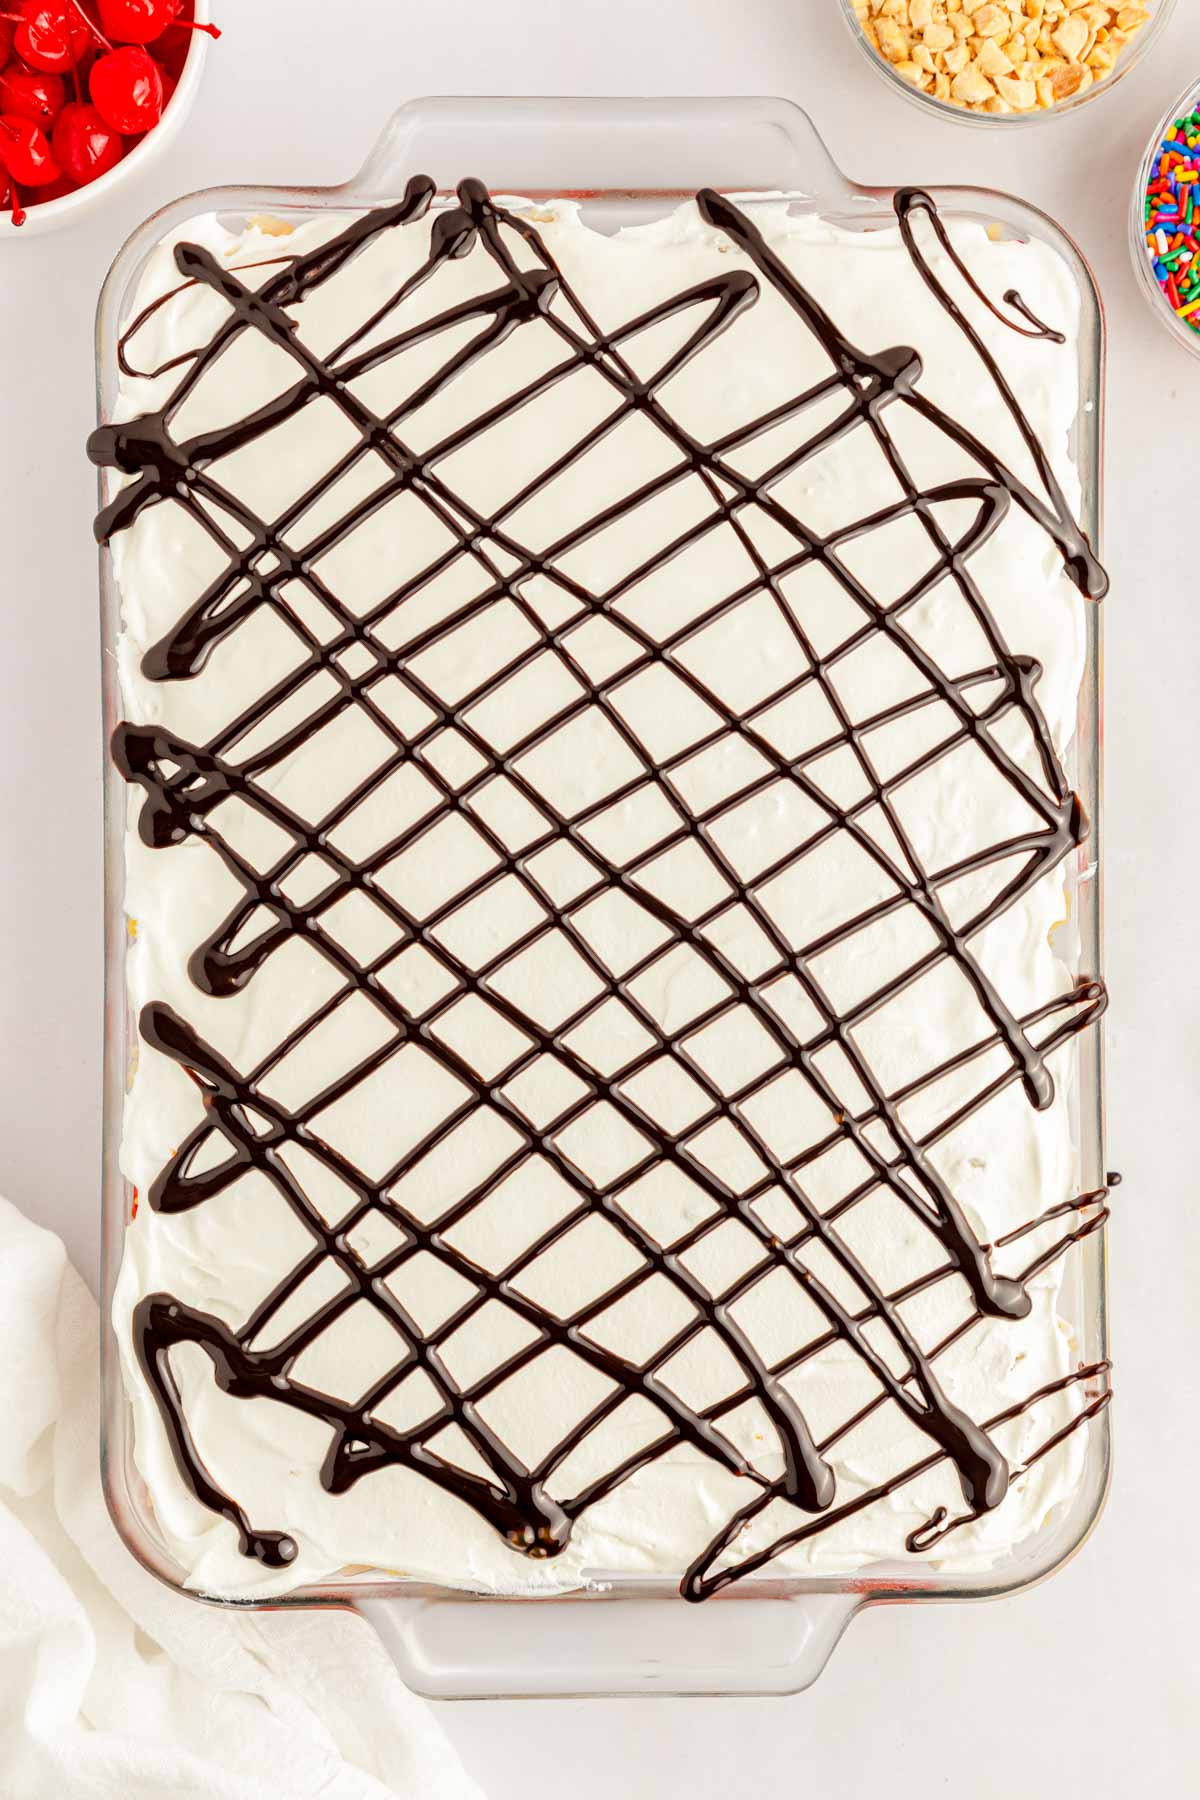 Chocolate drizzled over cool whip in a pan.